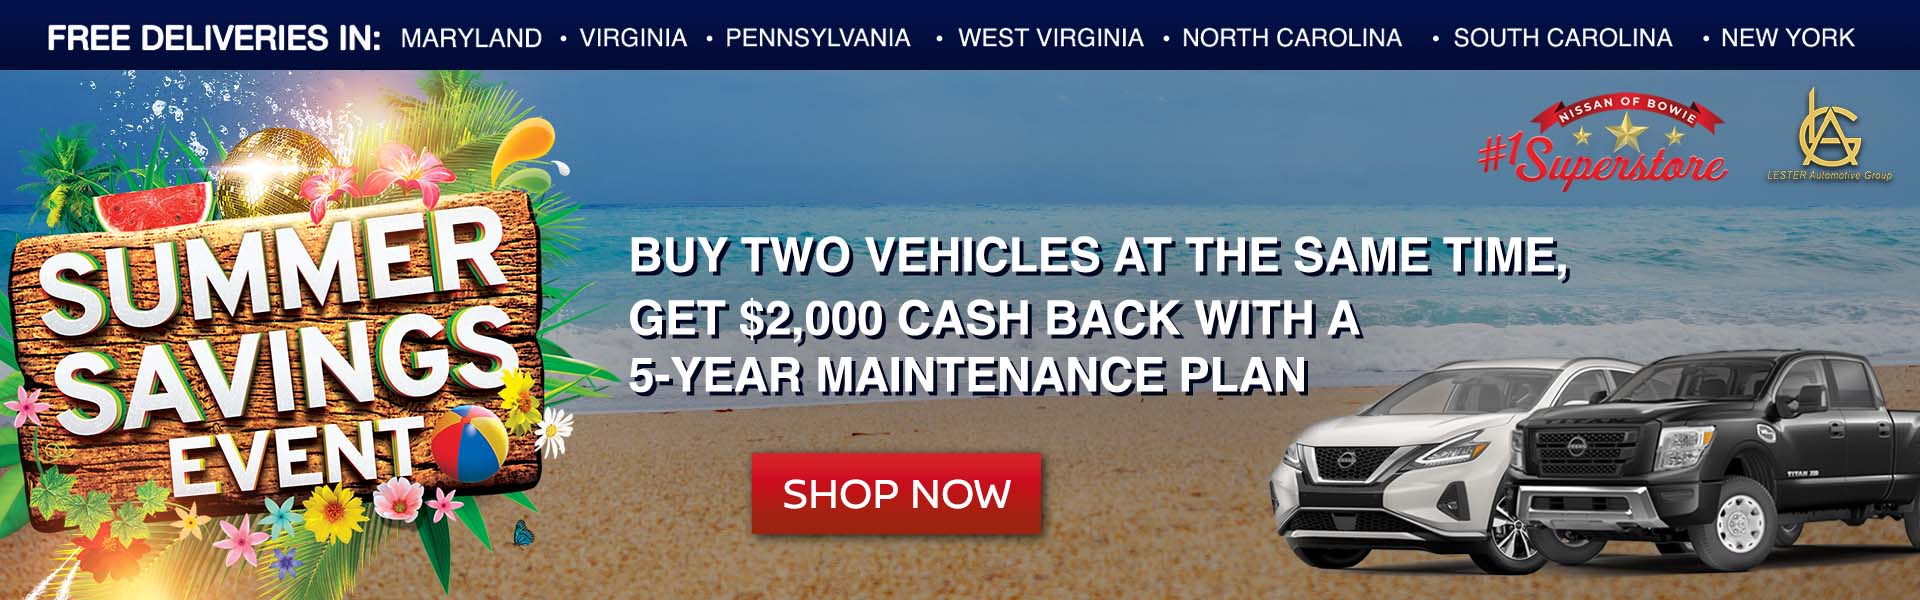 buy 2 vehicles at the same time special